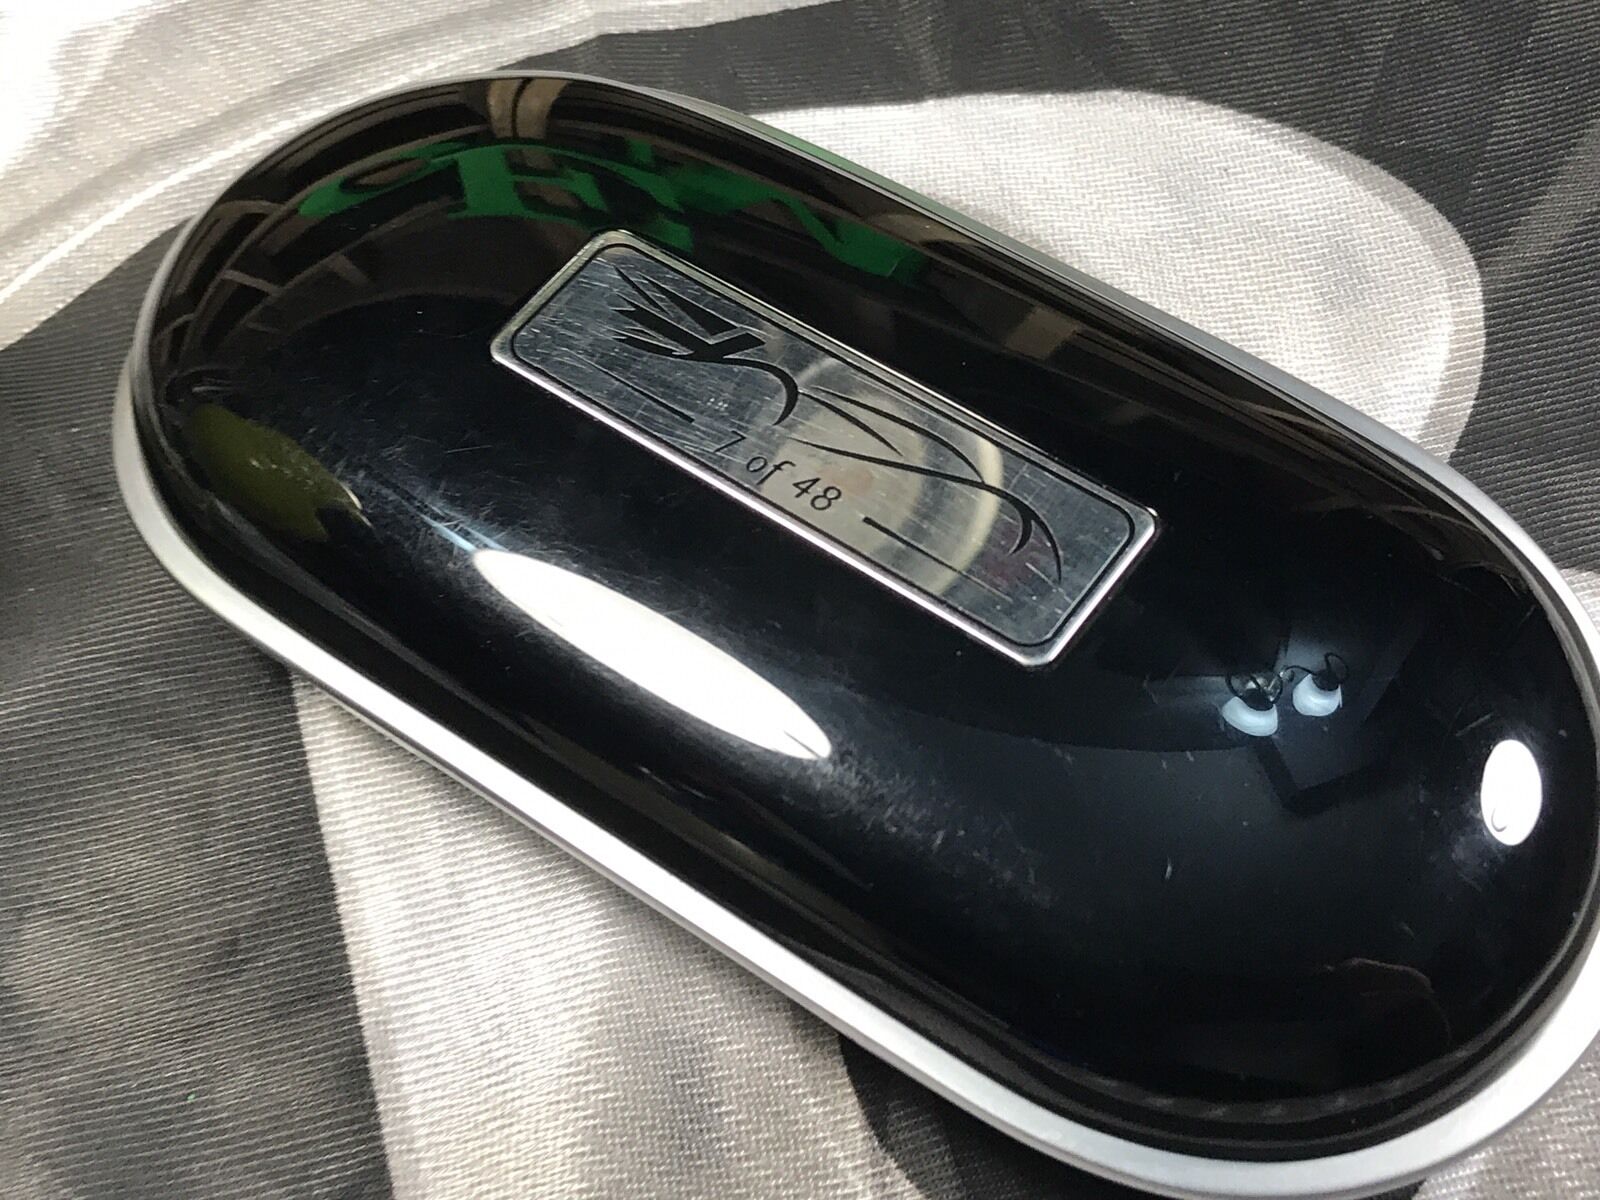 2013 LE MANS BENTLEY CONTINENTAL GT SUNGLASS CASE FOR CONSOLE (7 of 48) LMTD EDT Без бренда Continental GT